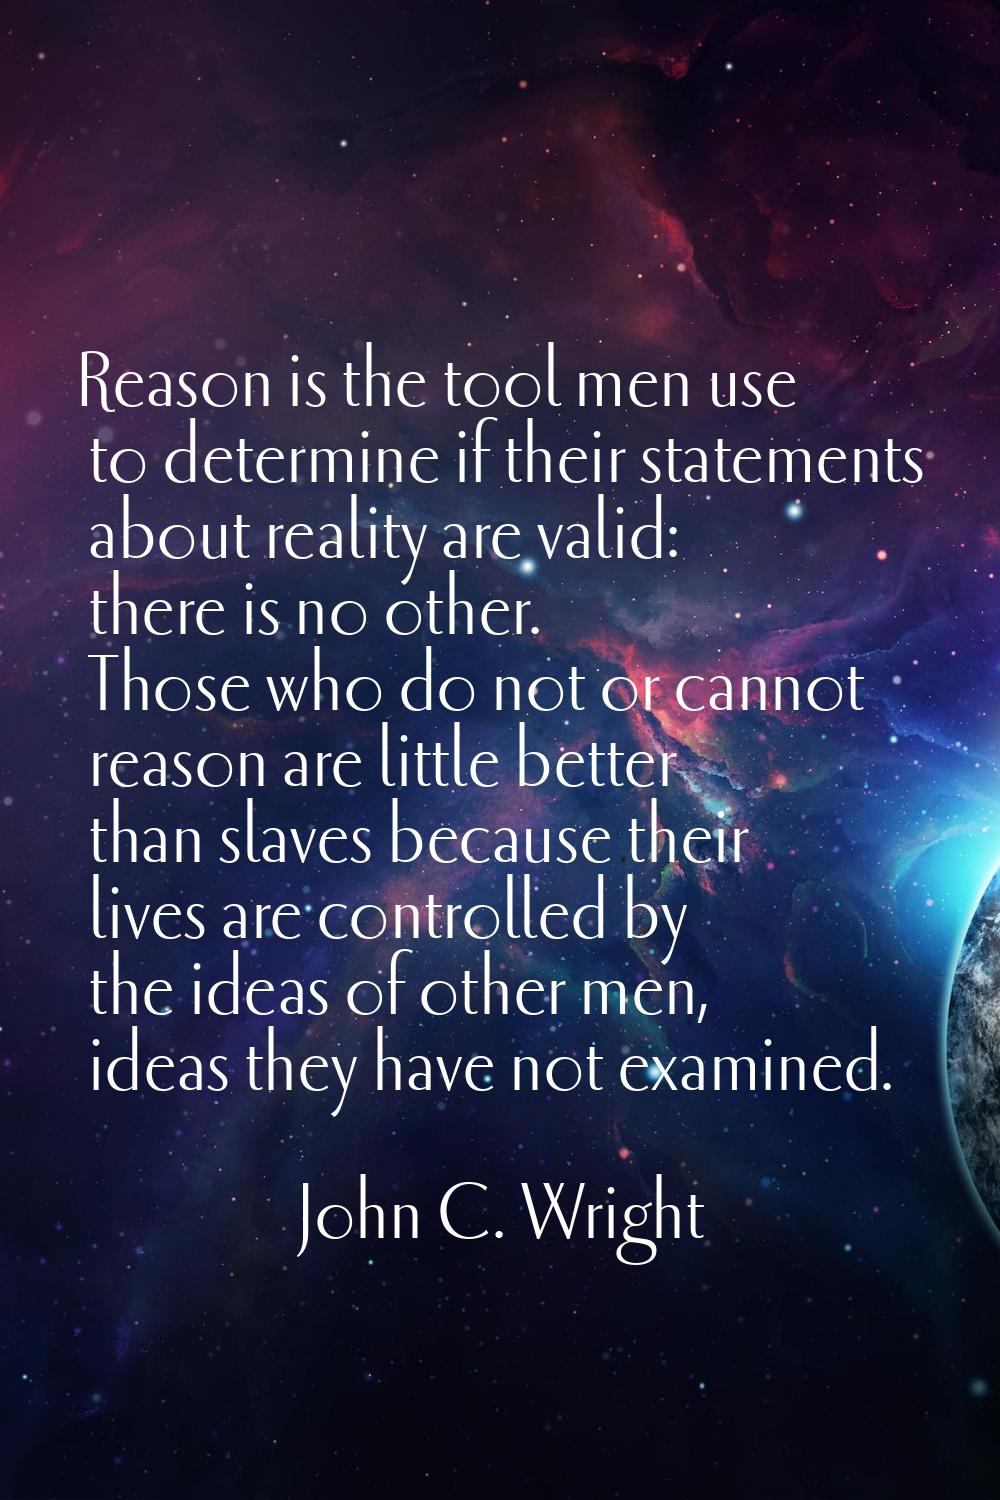 Reason is the tool men use to determine if their statements about reality are valid: there is no ot